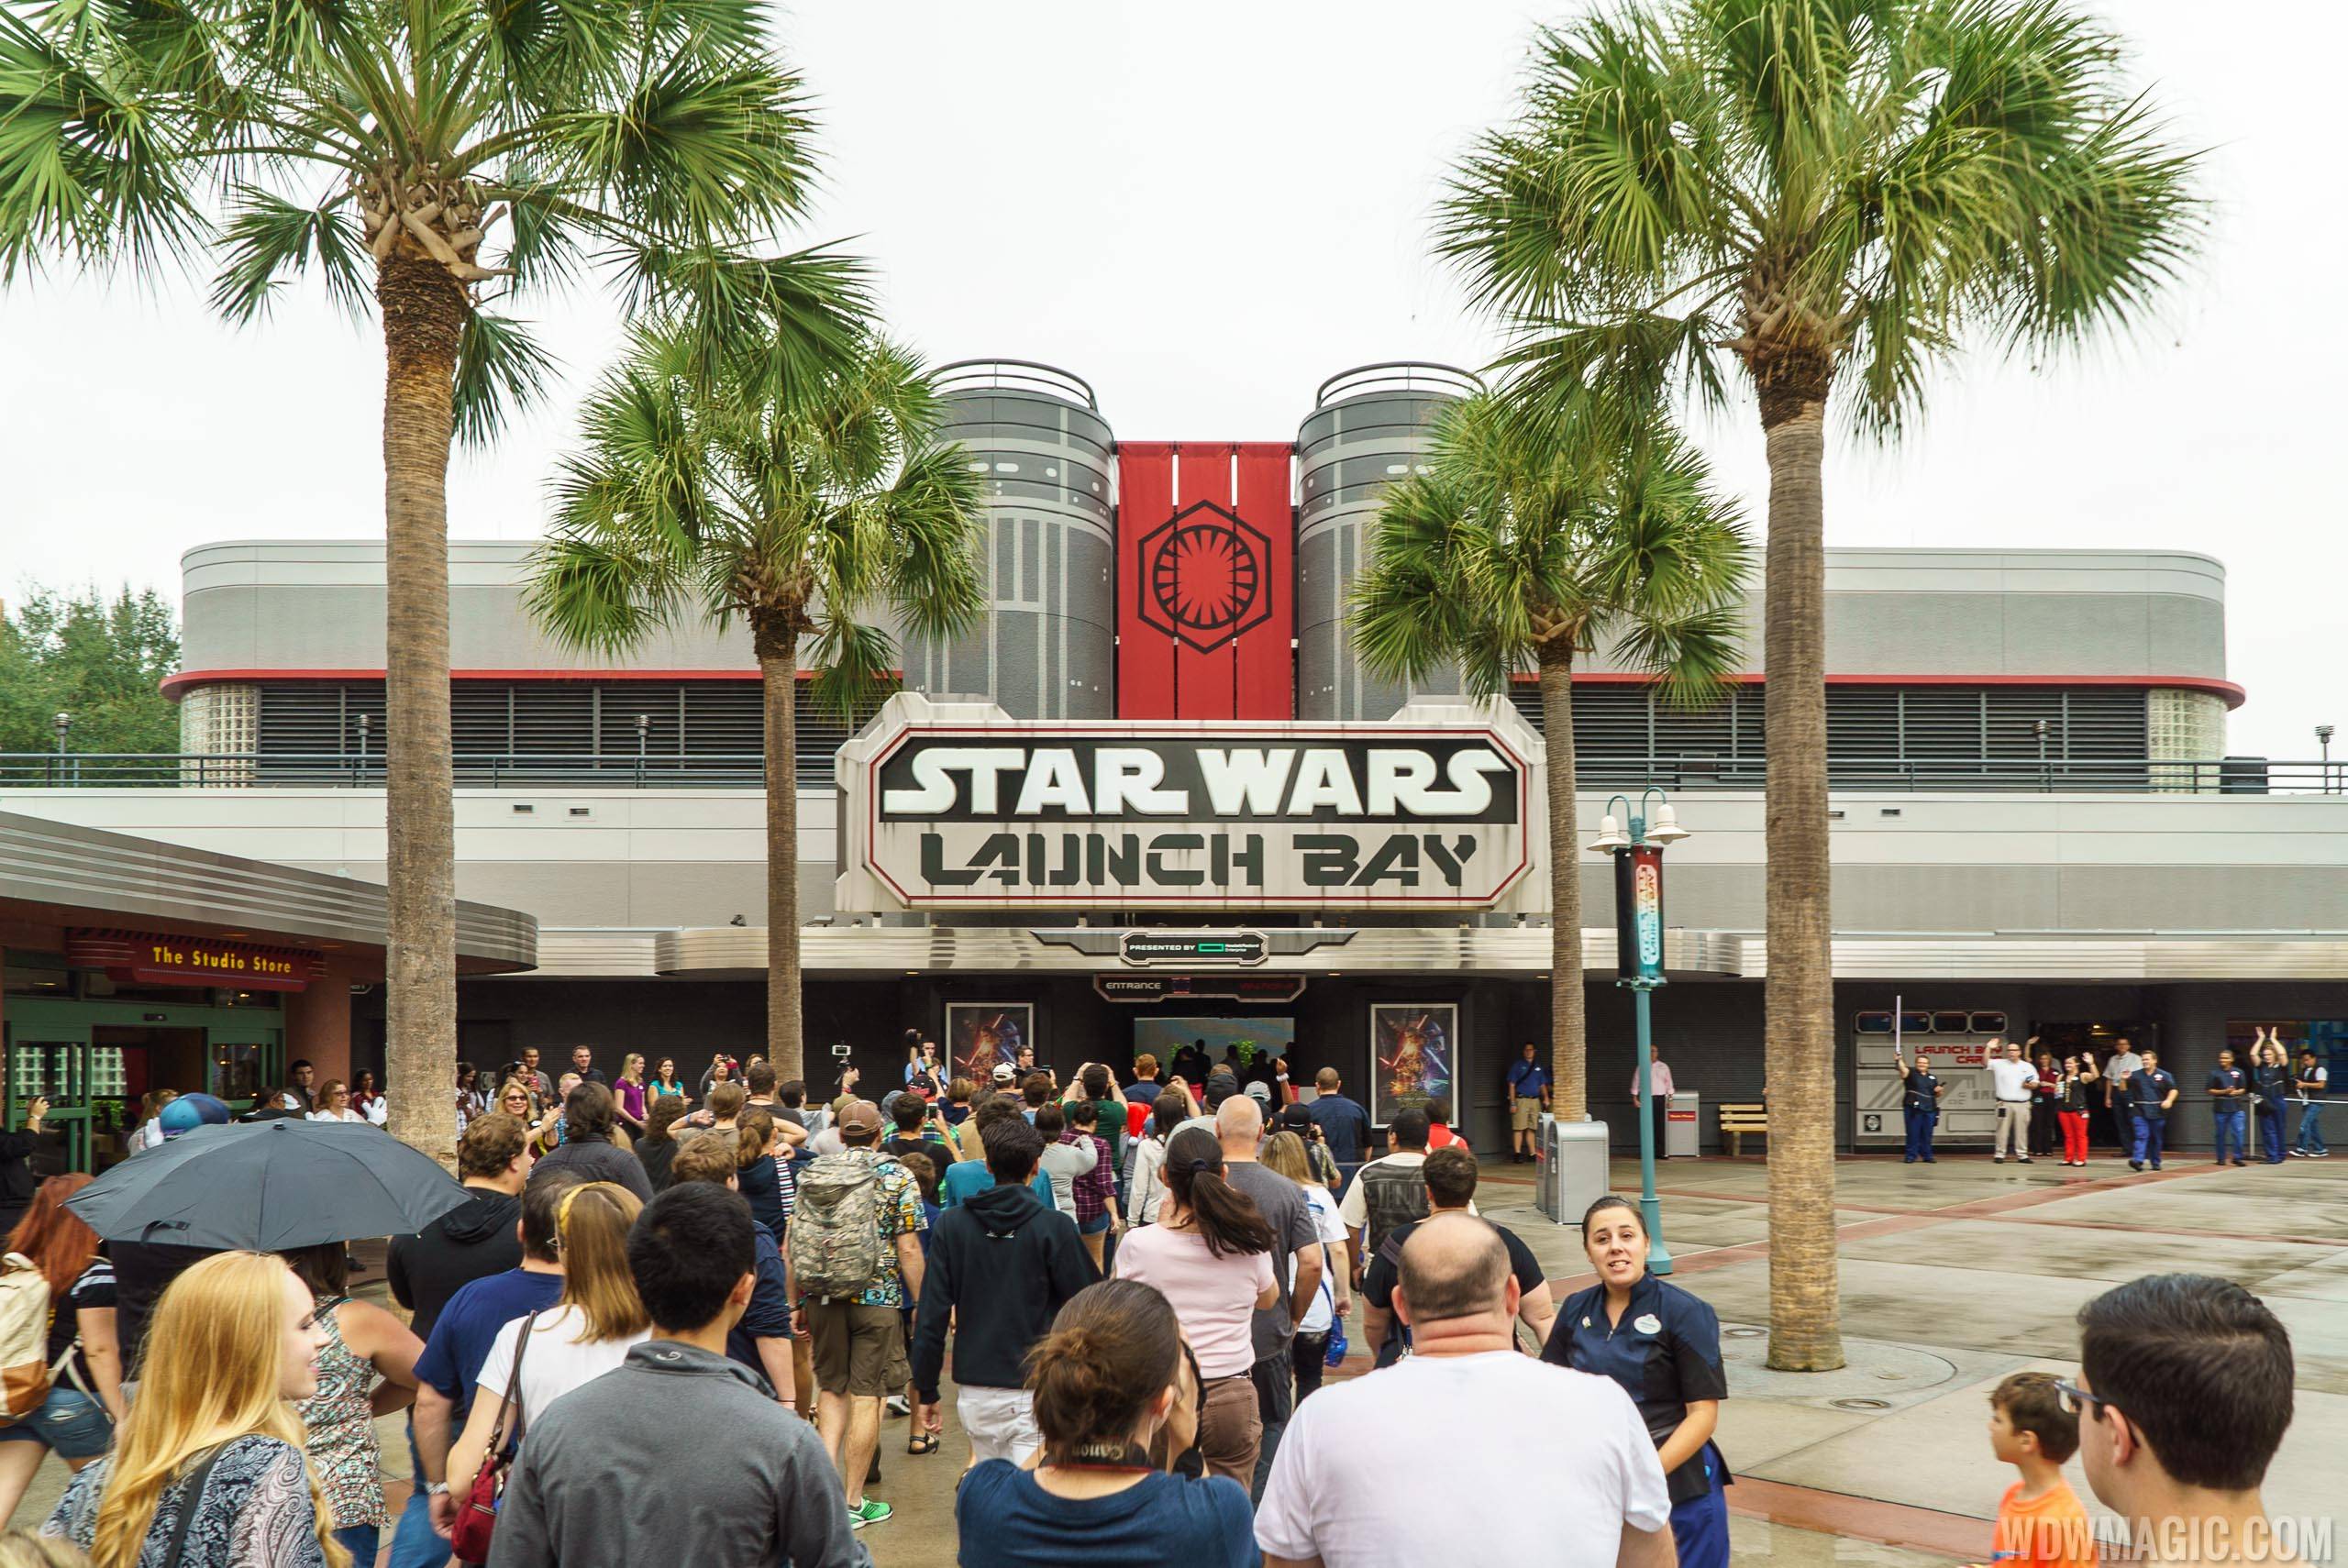 Reservations now open for the Star Wars Guided Tour at Disney's Hollywood Studios